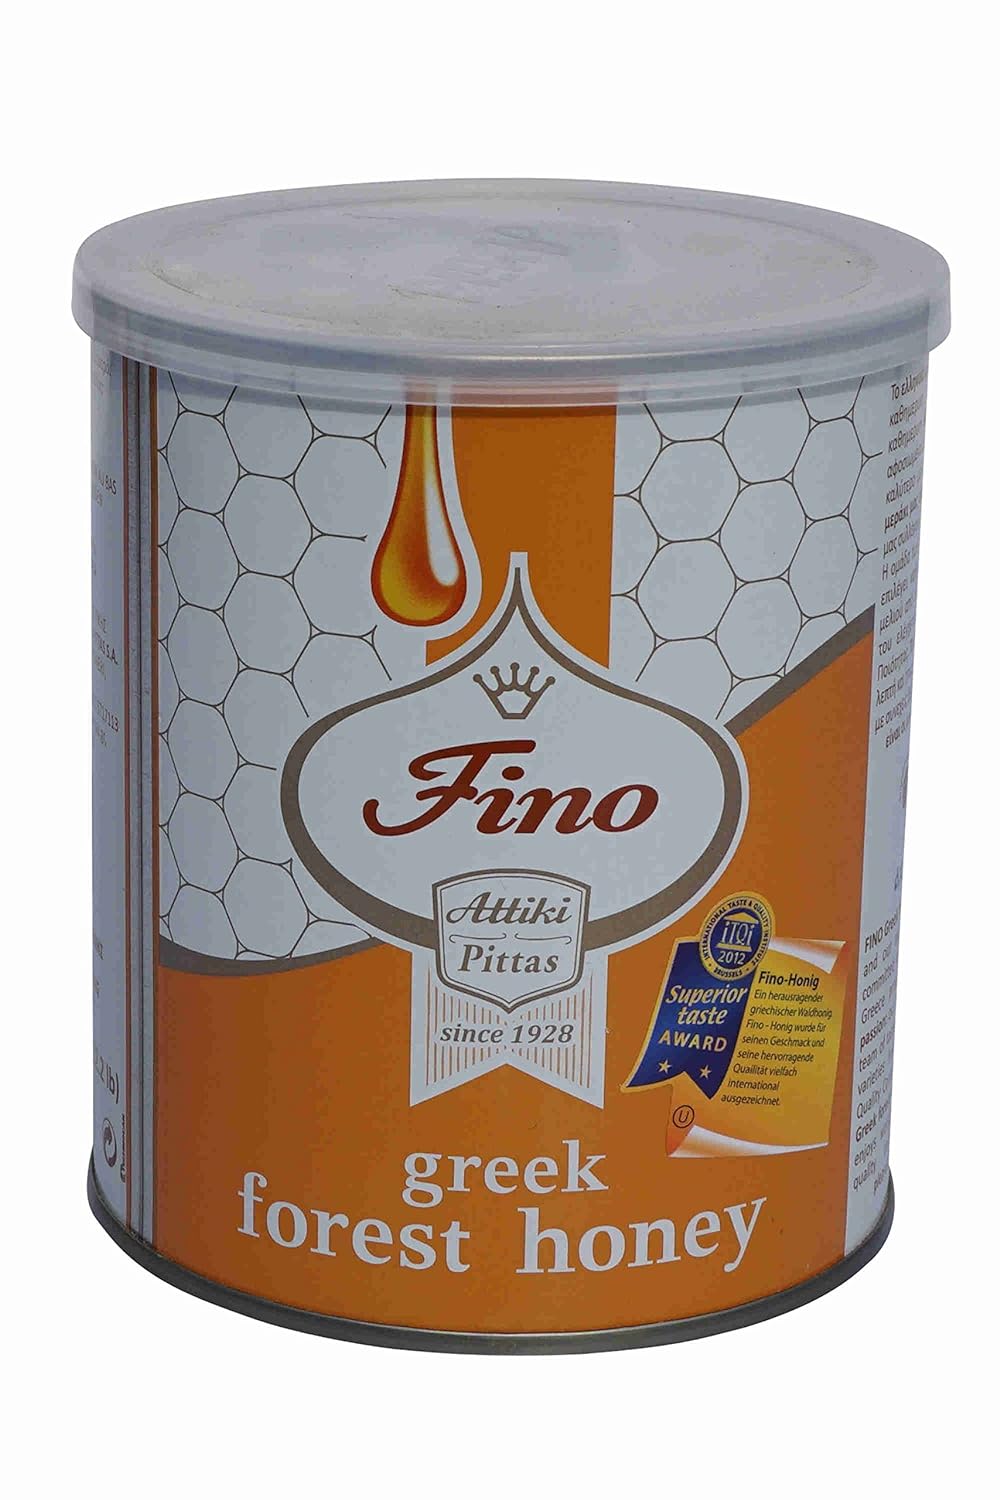 Honey Attiki Fino Wildflowers and Trees 1000g can Greek Fore